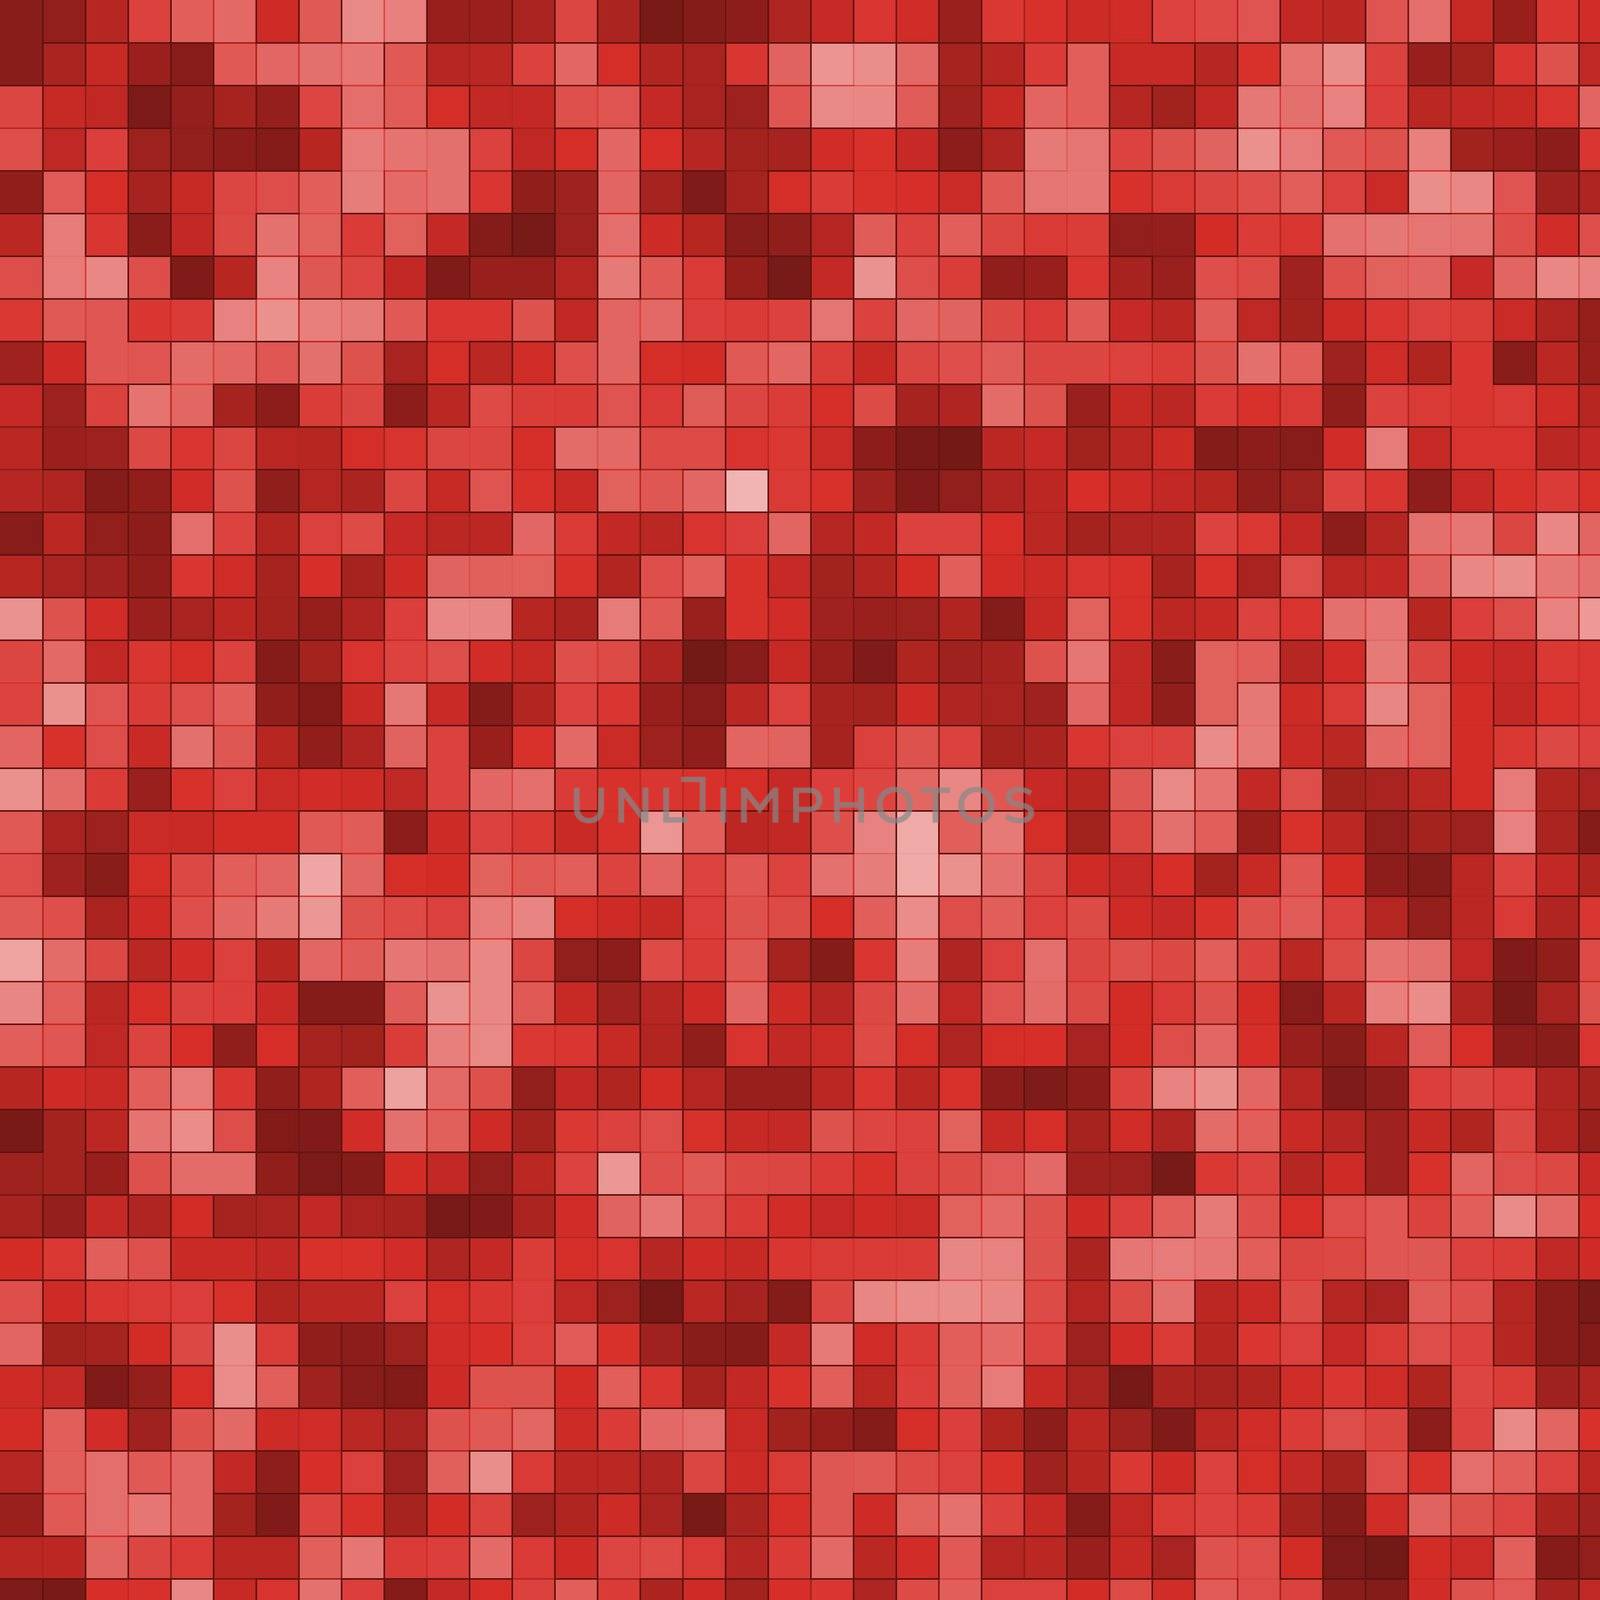 High resolution image red squares. 2d illustration background. Red  mosaic.